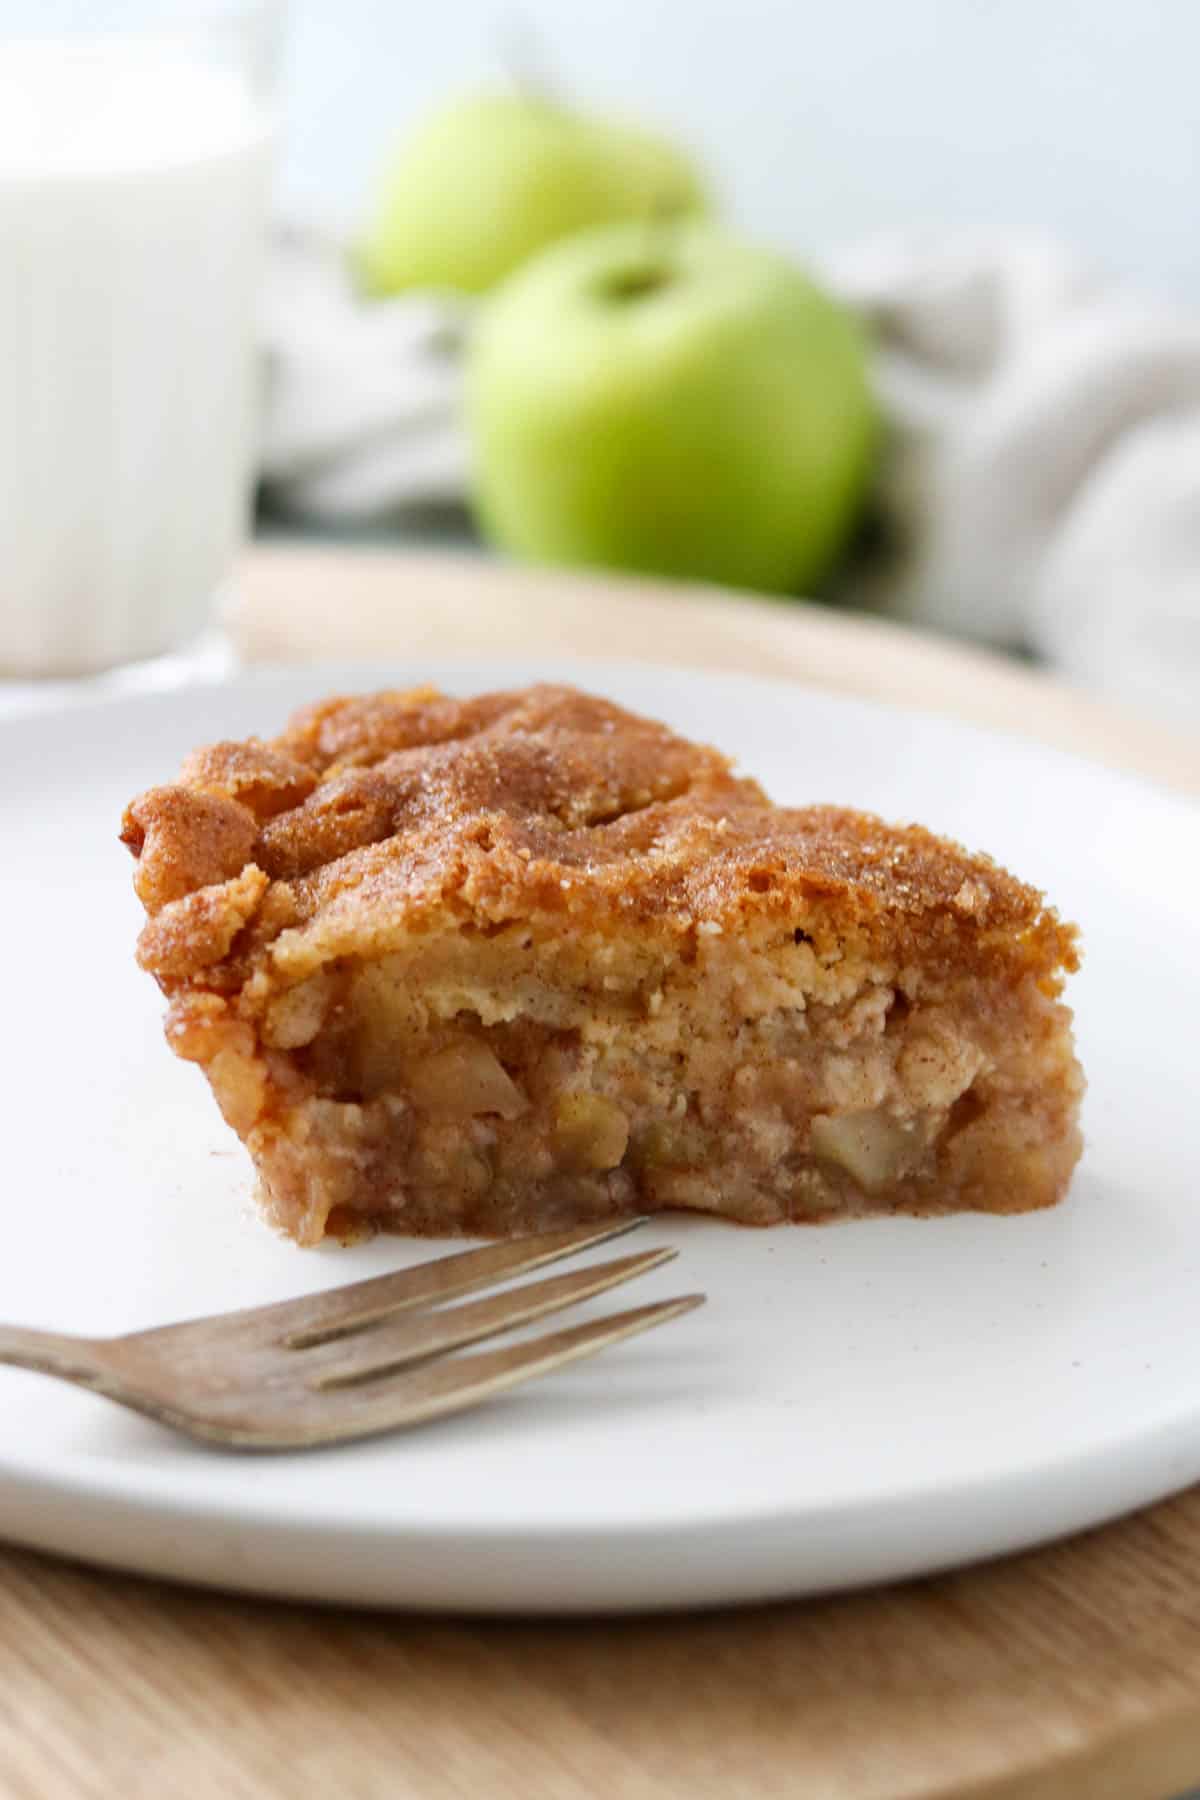 Slice of Swedish Apple Pie on a plate next to a fork and a glass of milk.